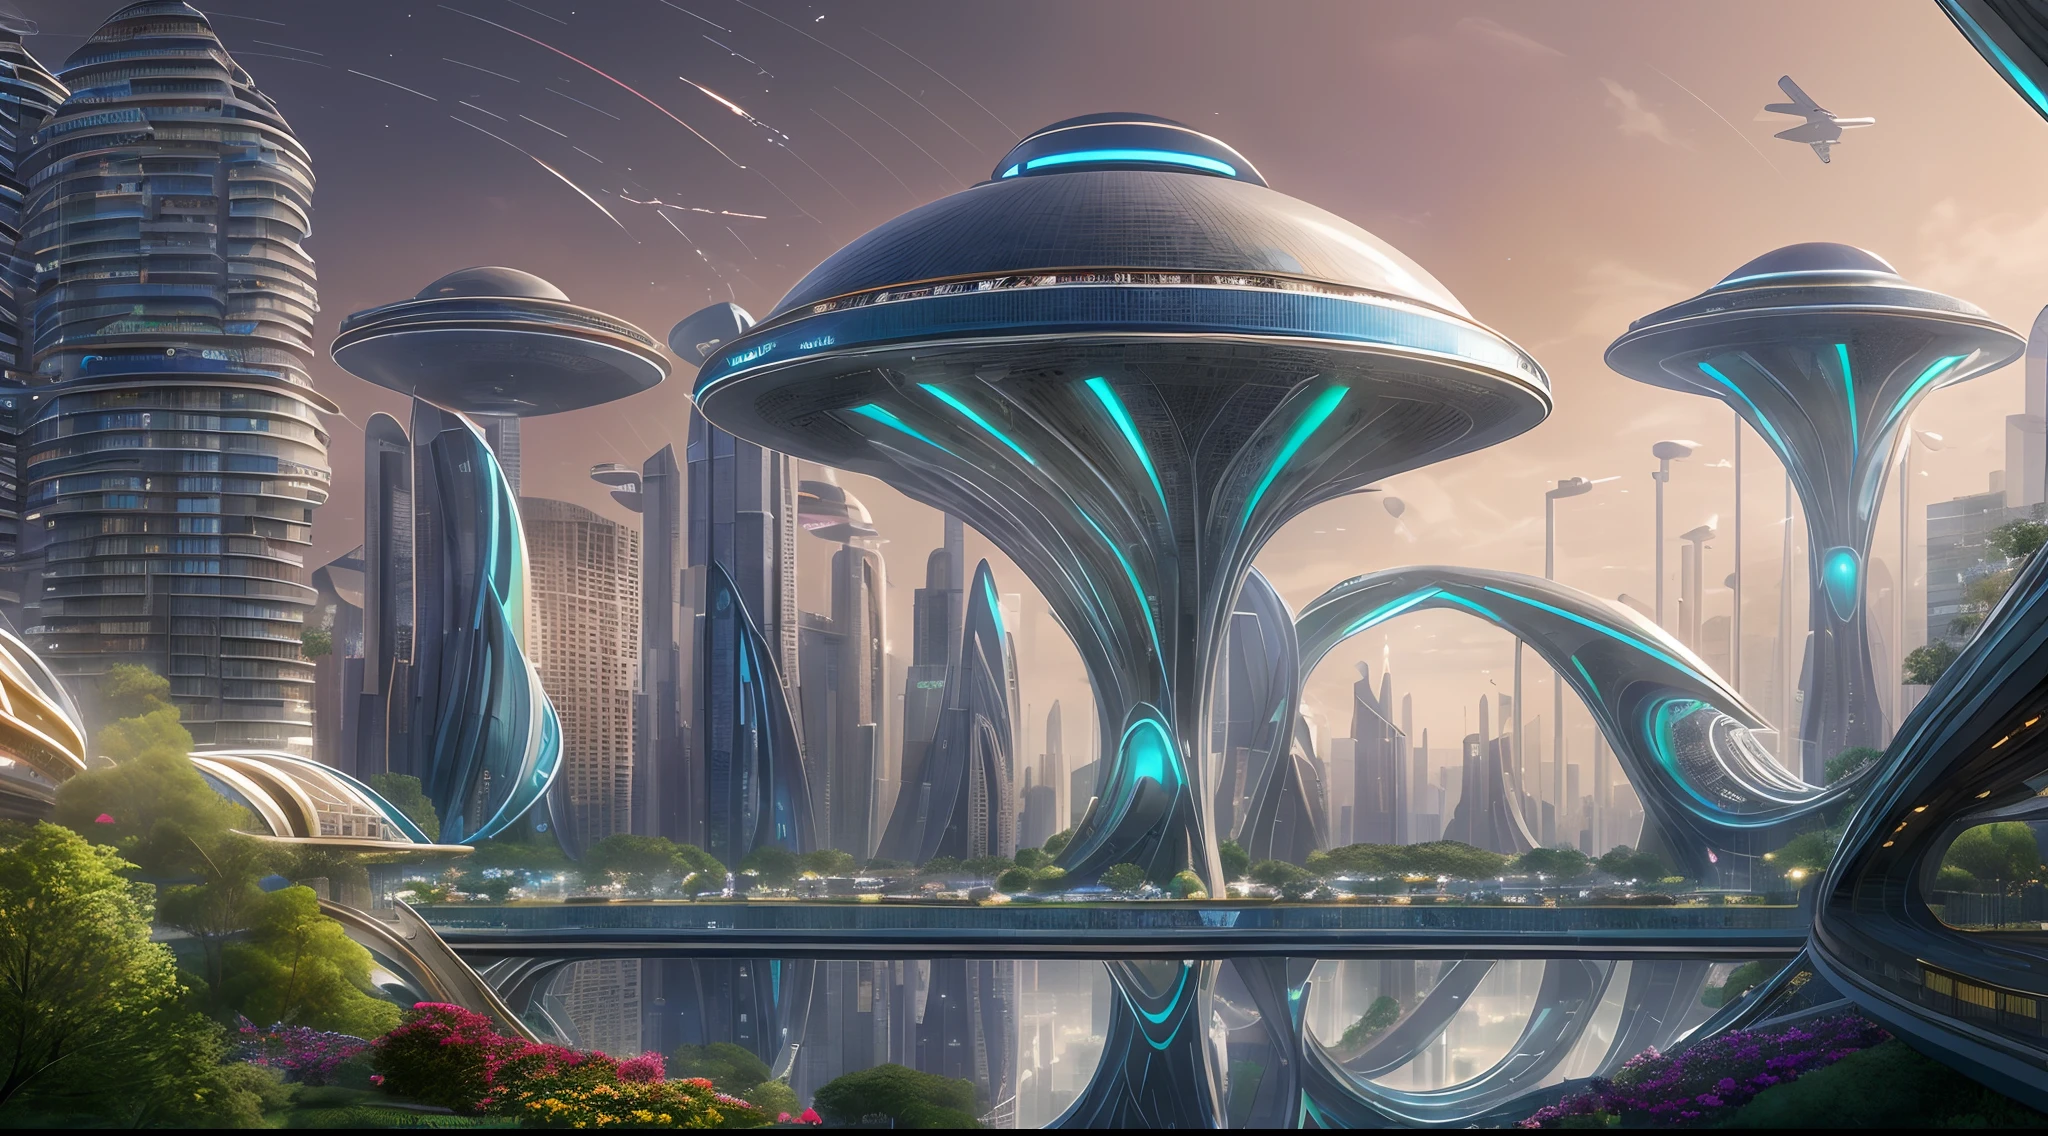 (best quality,4k,8k,highres,masterpiece:1.2),ultra-detailed,(realistic,photorealistic,photo-realistic:1.37),futuristic city,in space,spiral spacecraft,city inside spacecraft,space outside,scattered buildings,flowers,flower arrangements,water flow,fountains,rounded,silk-like,crystal glass,civil structures,concrete,glass walls,forest city,fantasy,24th century,skyscrapers,domes,airborne transportation,hovering vehicles,interstellar travel,artificial intelligence,advanced technology,bright colors,neon lights,glowing signs,energy-efficient buildings,floating gardens,greenery,harmonious coexistence,cosmic vista,peaceful atmosphere,endless horizon,expansive views,sophisticated aesthetics,unusual architecture,solar panels,advanced sustainability,efficient infrastructure,hidden passageways,innovative urban planning,metropolitan center,transparent walkways,modern urban living,seamless integration,harmony with nature,high-tech surveillance,zero-gravity experience,interconnected networks,rapid transportation,jetpacks,futuristic fashion,diverse cultures,celebrating diversity,artificial sky,celestial bodies,space exploration,extraterrestrial life,starships,advanced communication system,utopian vision,optimistic outlook,mind-blowing technology,awe-inspiring designs,futuristic energy sources,zero emissions,dynamic cityscape,advanced materials and construction methods,sky gardens,vibrant street life,innovative social systems,colossal structures,impressive skyline,immaculate cleanliness,pollution-free environment,enchanting vistas,thriving ecosystem,utmost tranquility,bustling city,cosmic wonders,advanced healthcare system,sustainable living,exceptional livability,emerging trends,innovative art installations,interactive sculptures,robust economy,technological marvels,forward-thinking mindset.